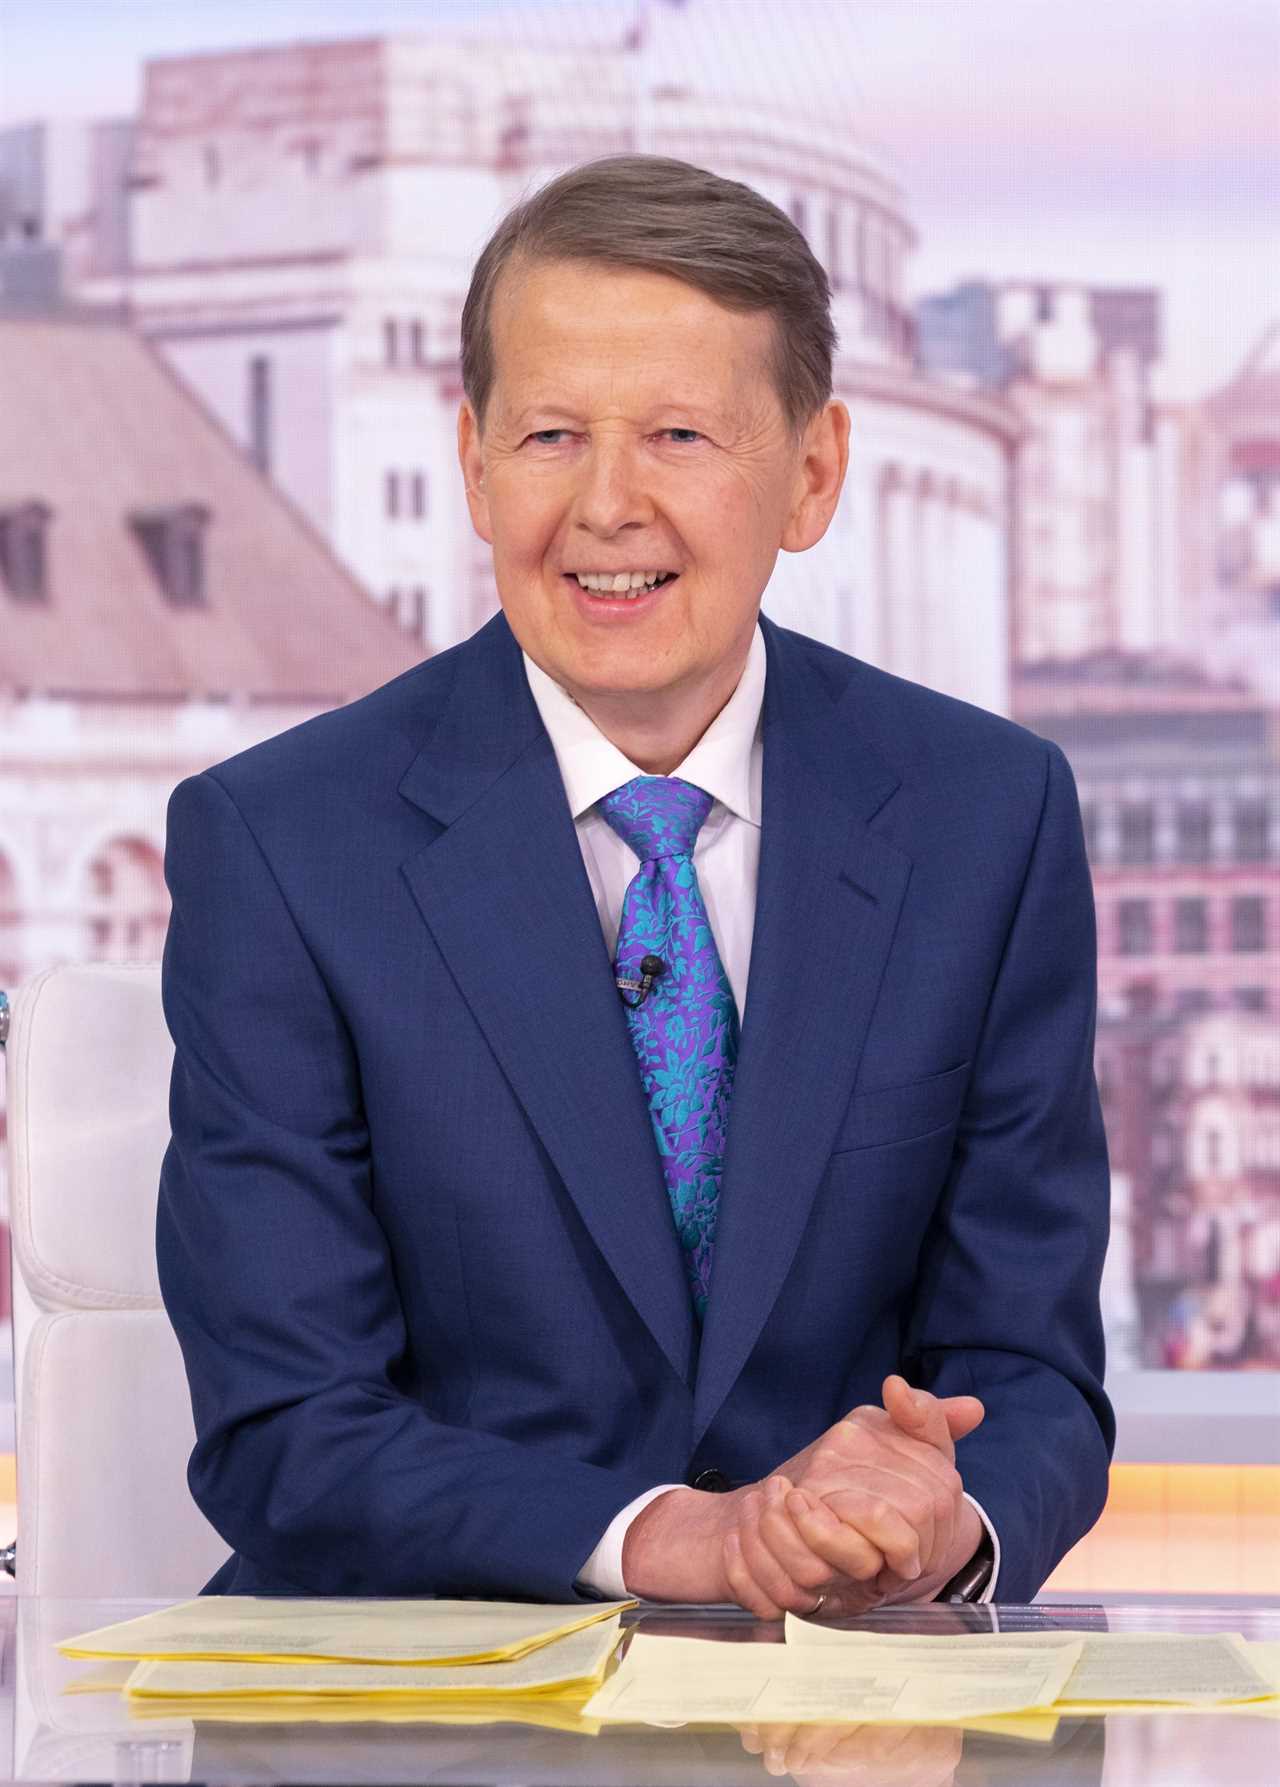 As Bill Turnbull dies of prostate cancer – the 6 signs you need to know